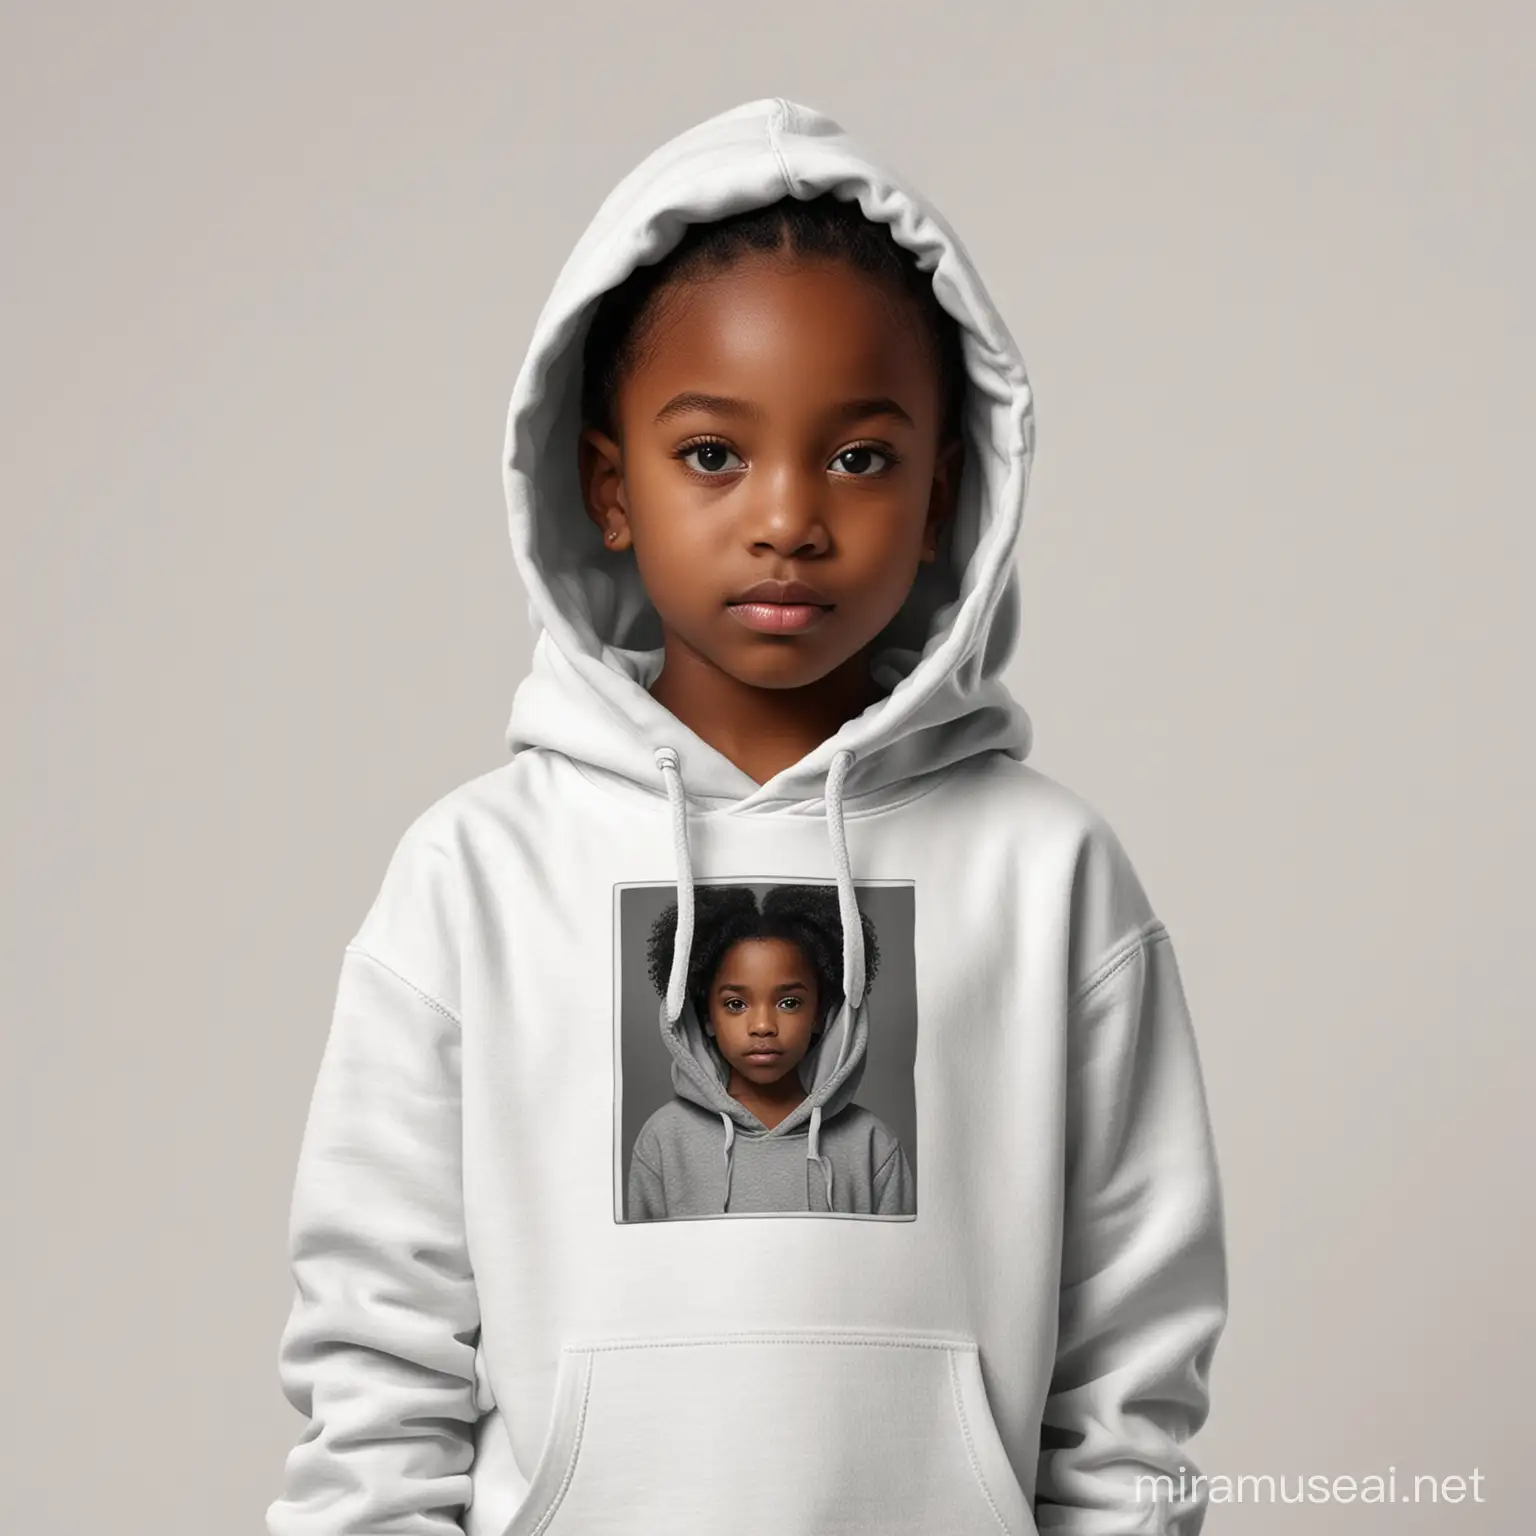 black girl kid, using a hoodie with classic fit, photographic background white